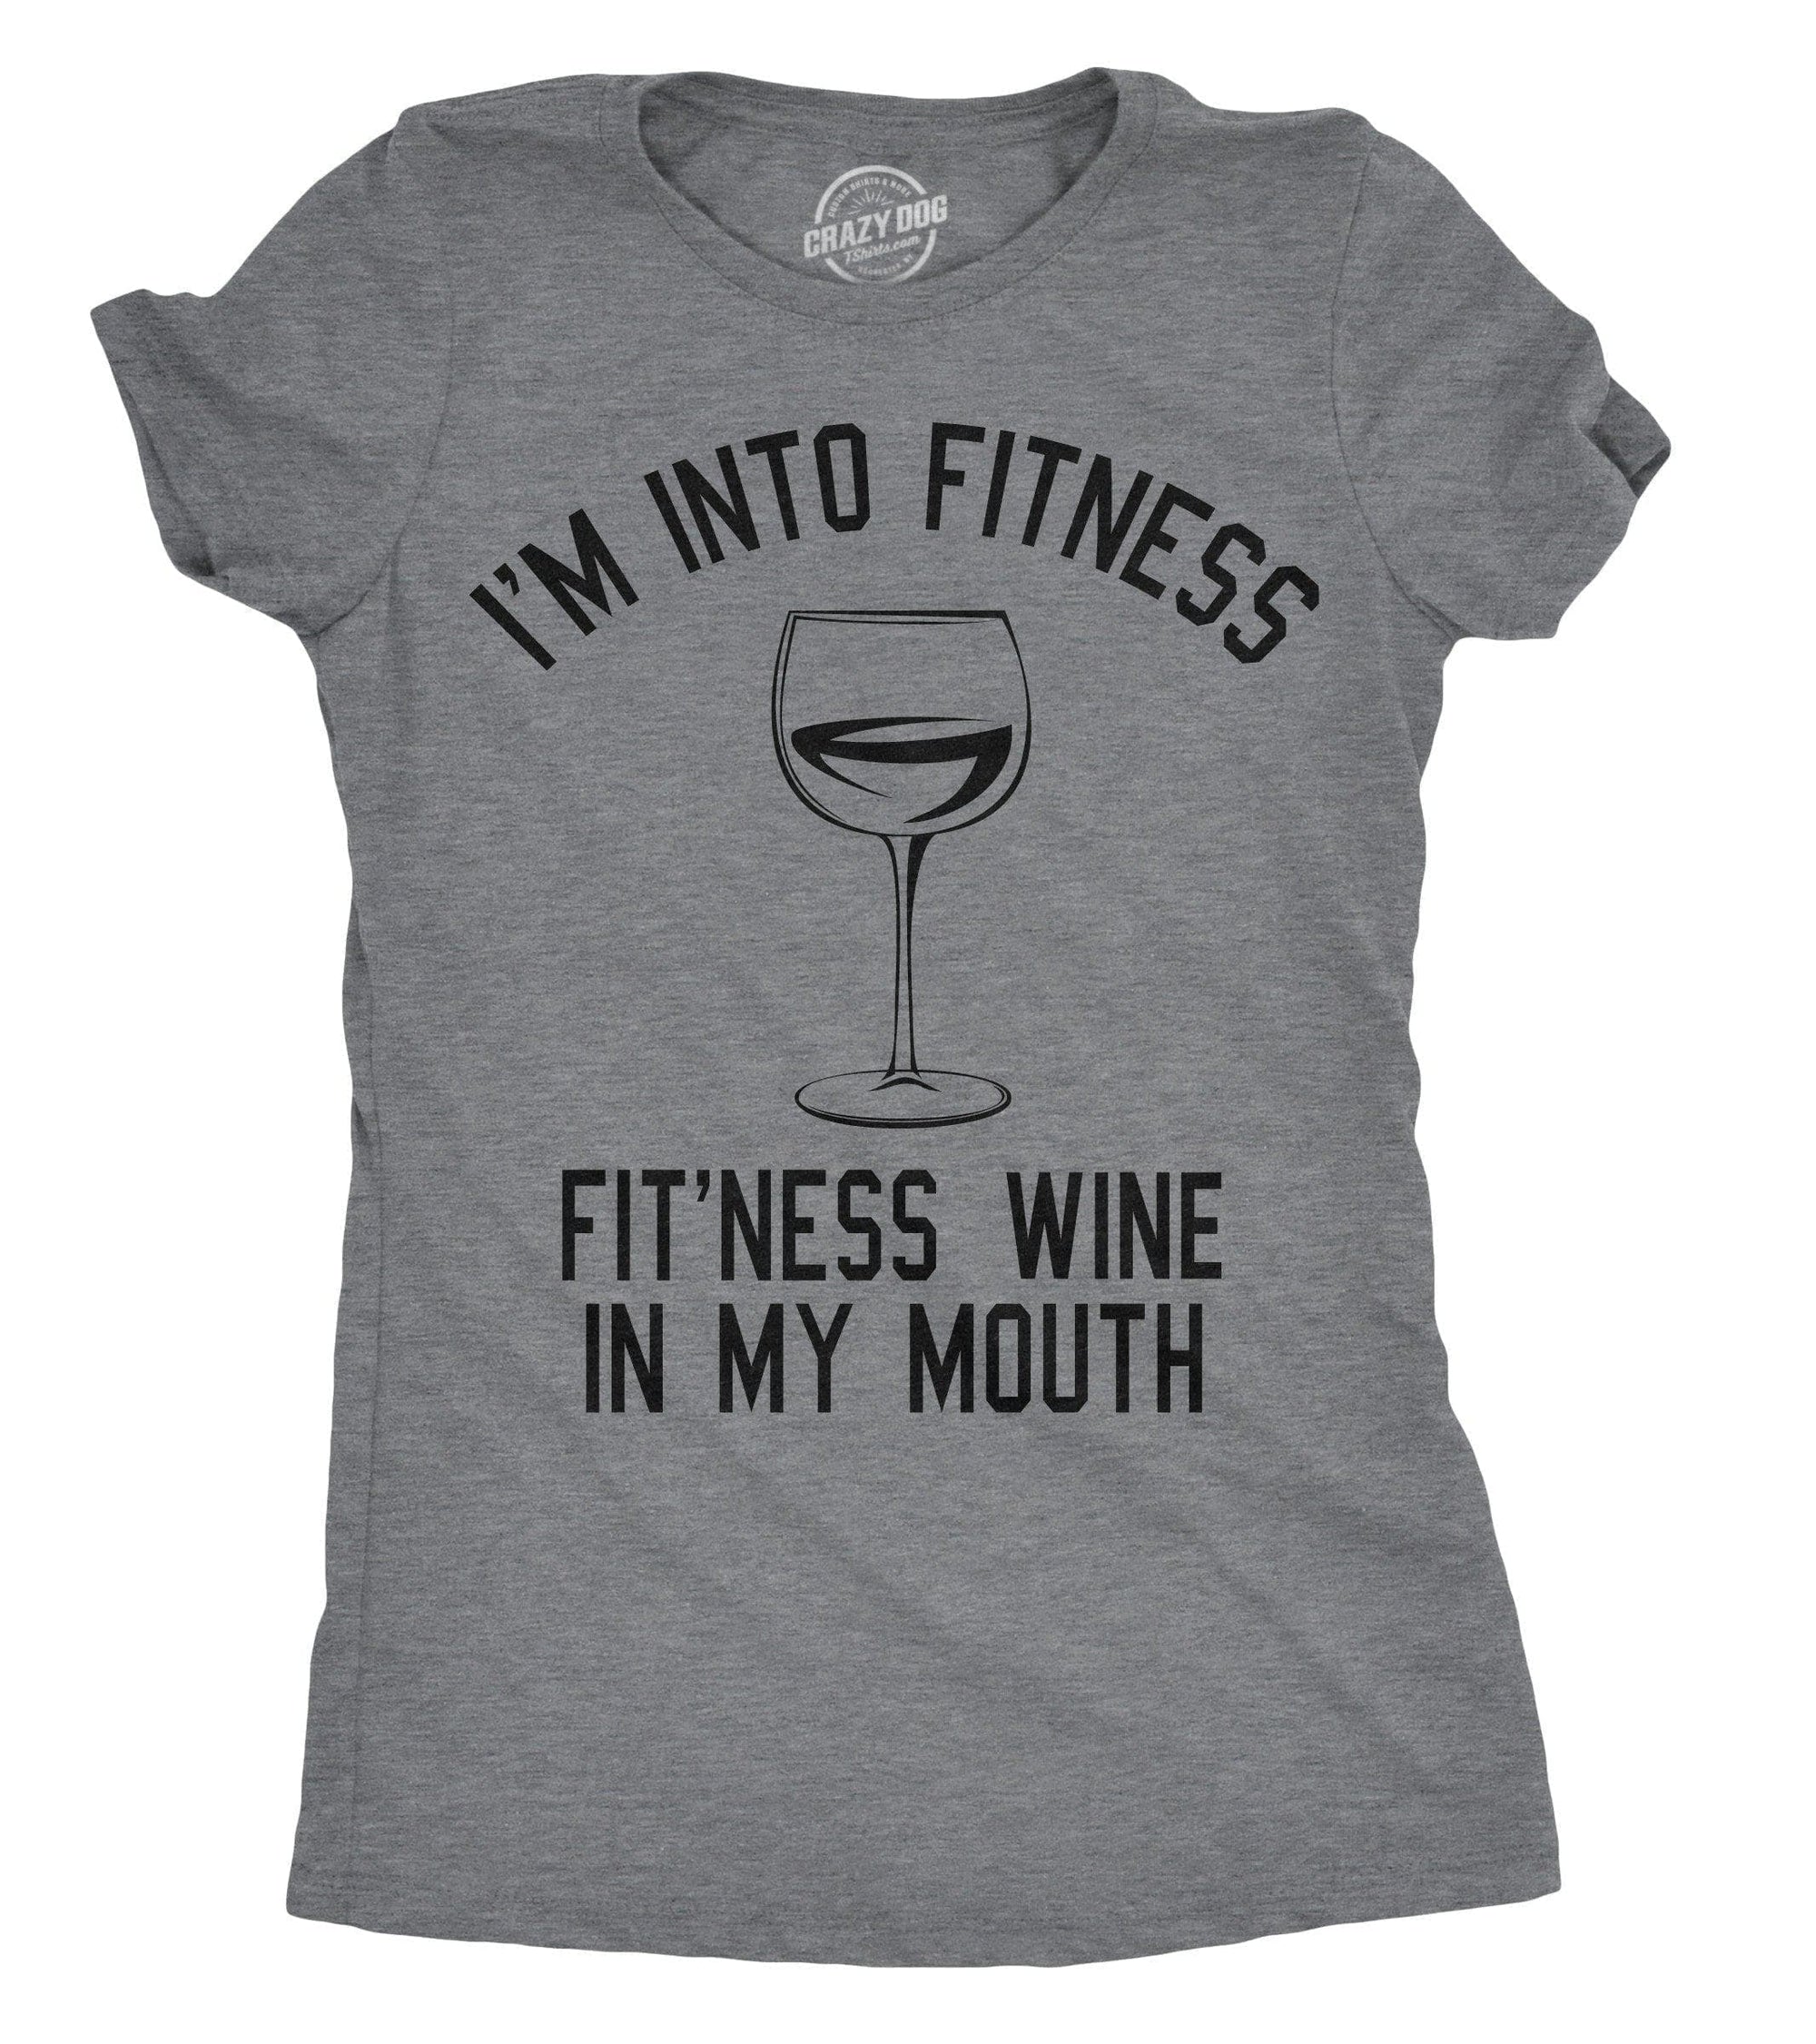 Fitness Wine In My Mouth Women's Tshirt  -  Crazy Dog T-Shirts